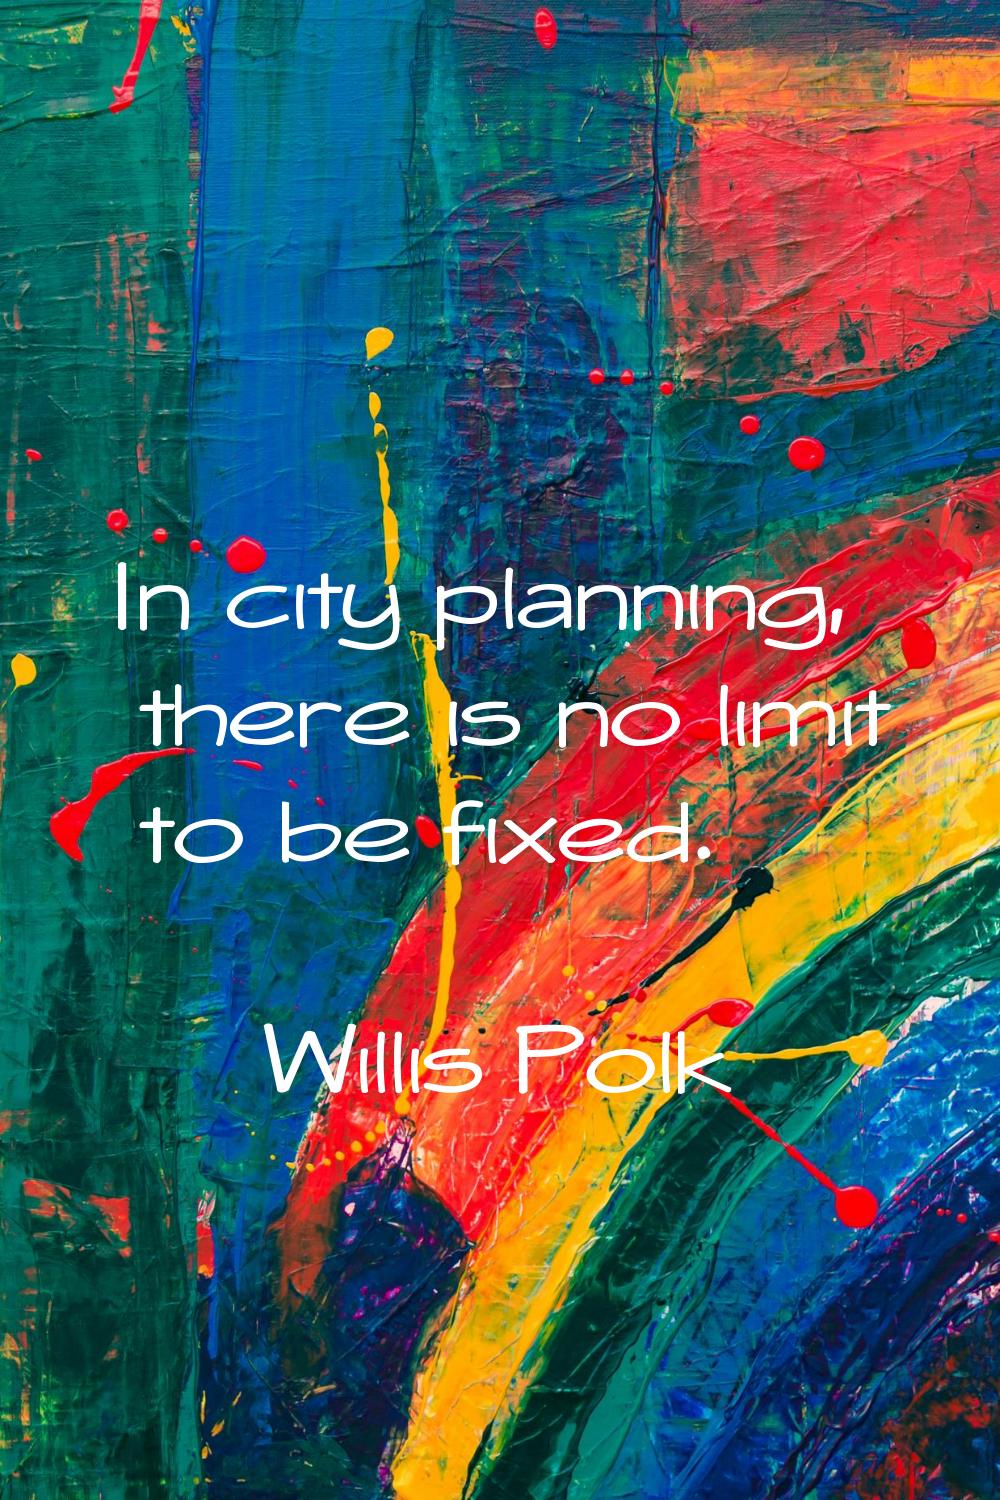 In city planning, there is no limit to be fixed.